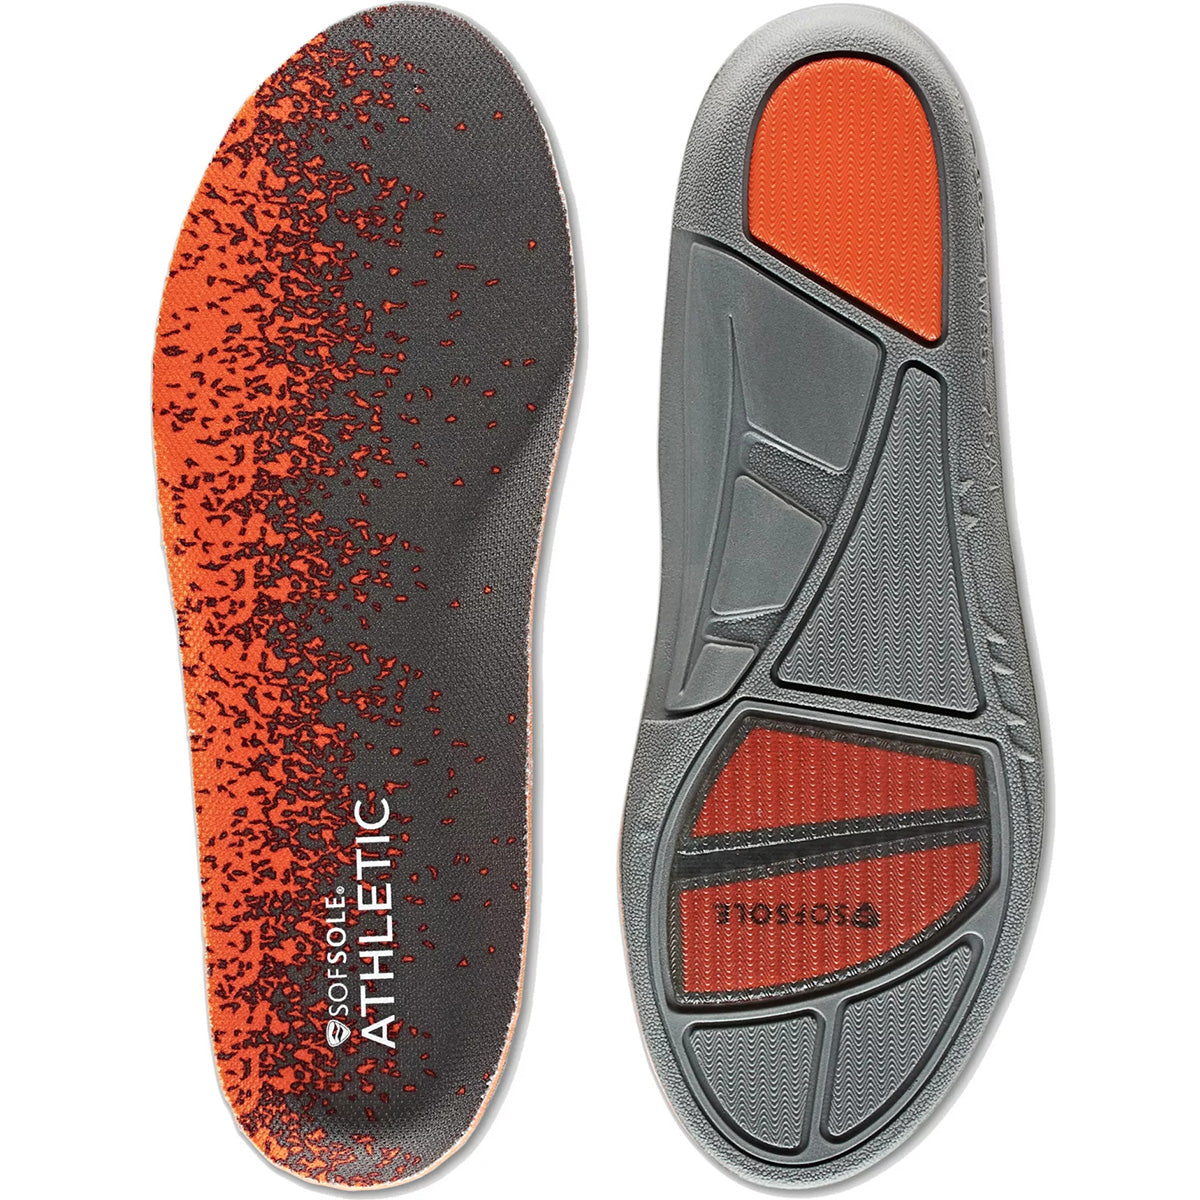 Sof Sole Athletic Full Length Shoe Insoles SofSole